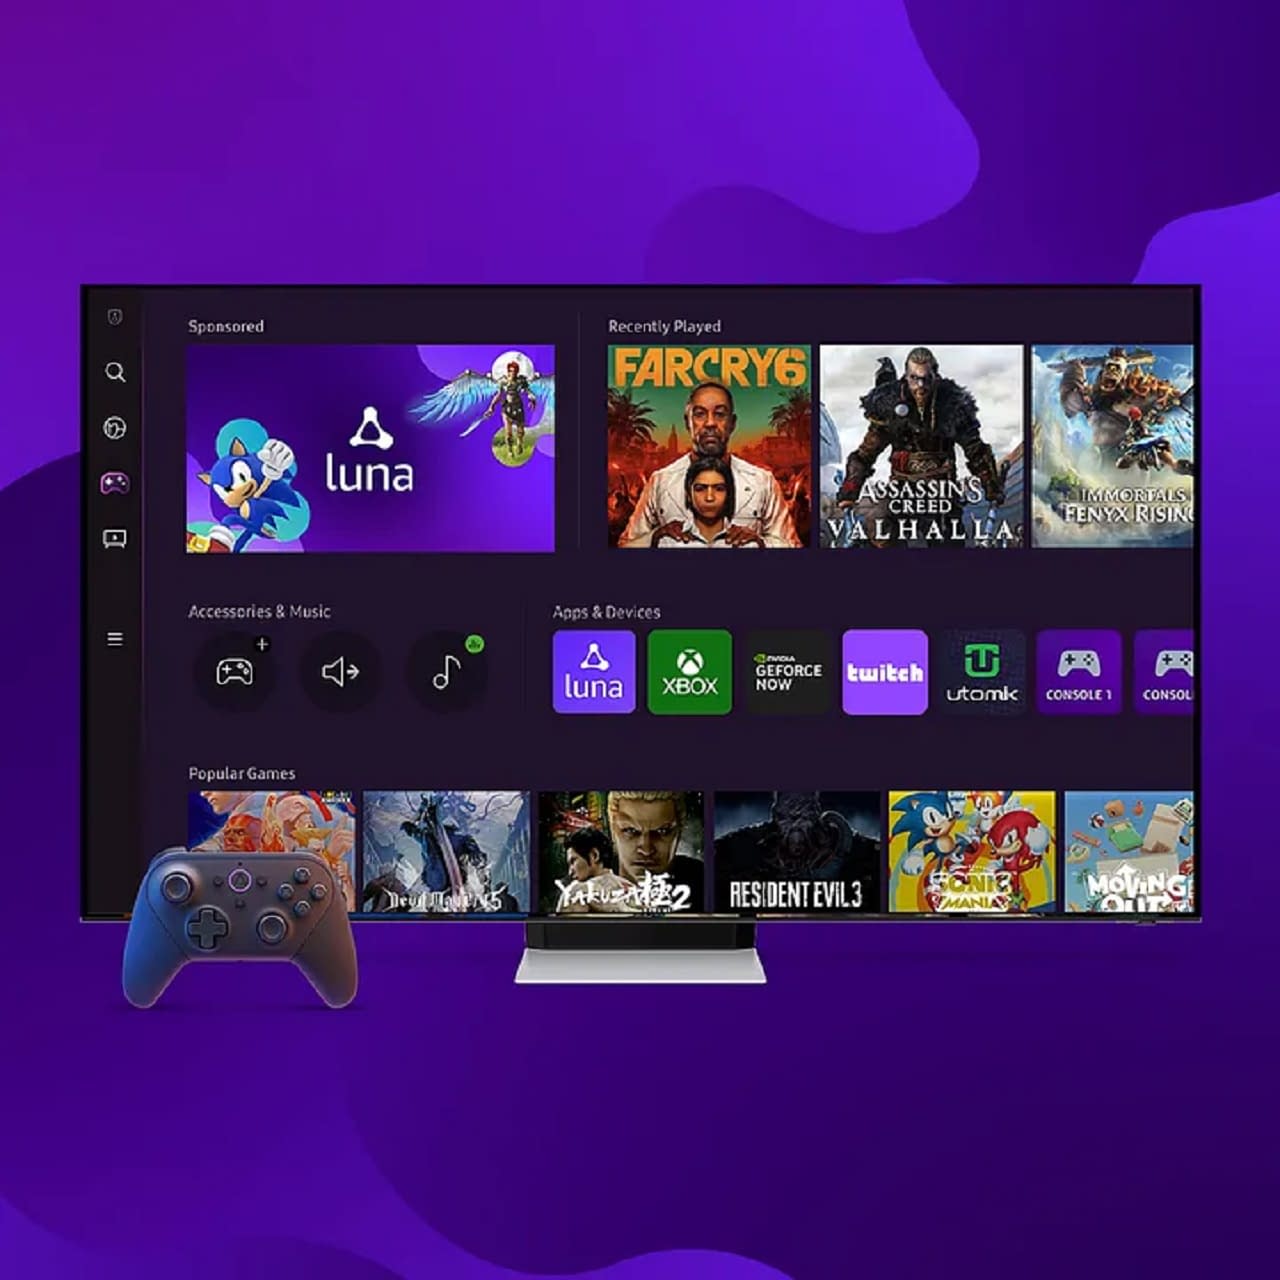 Xbox Game Pass is officially coming to Samsung TVs this month